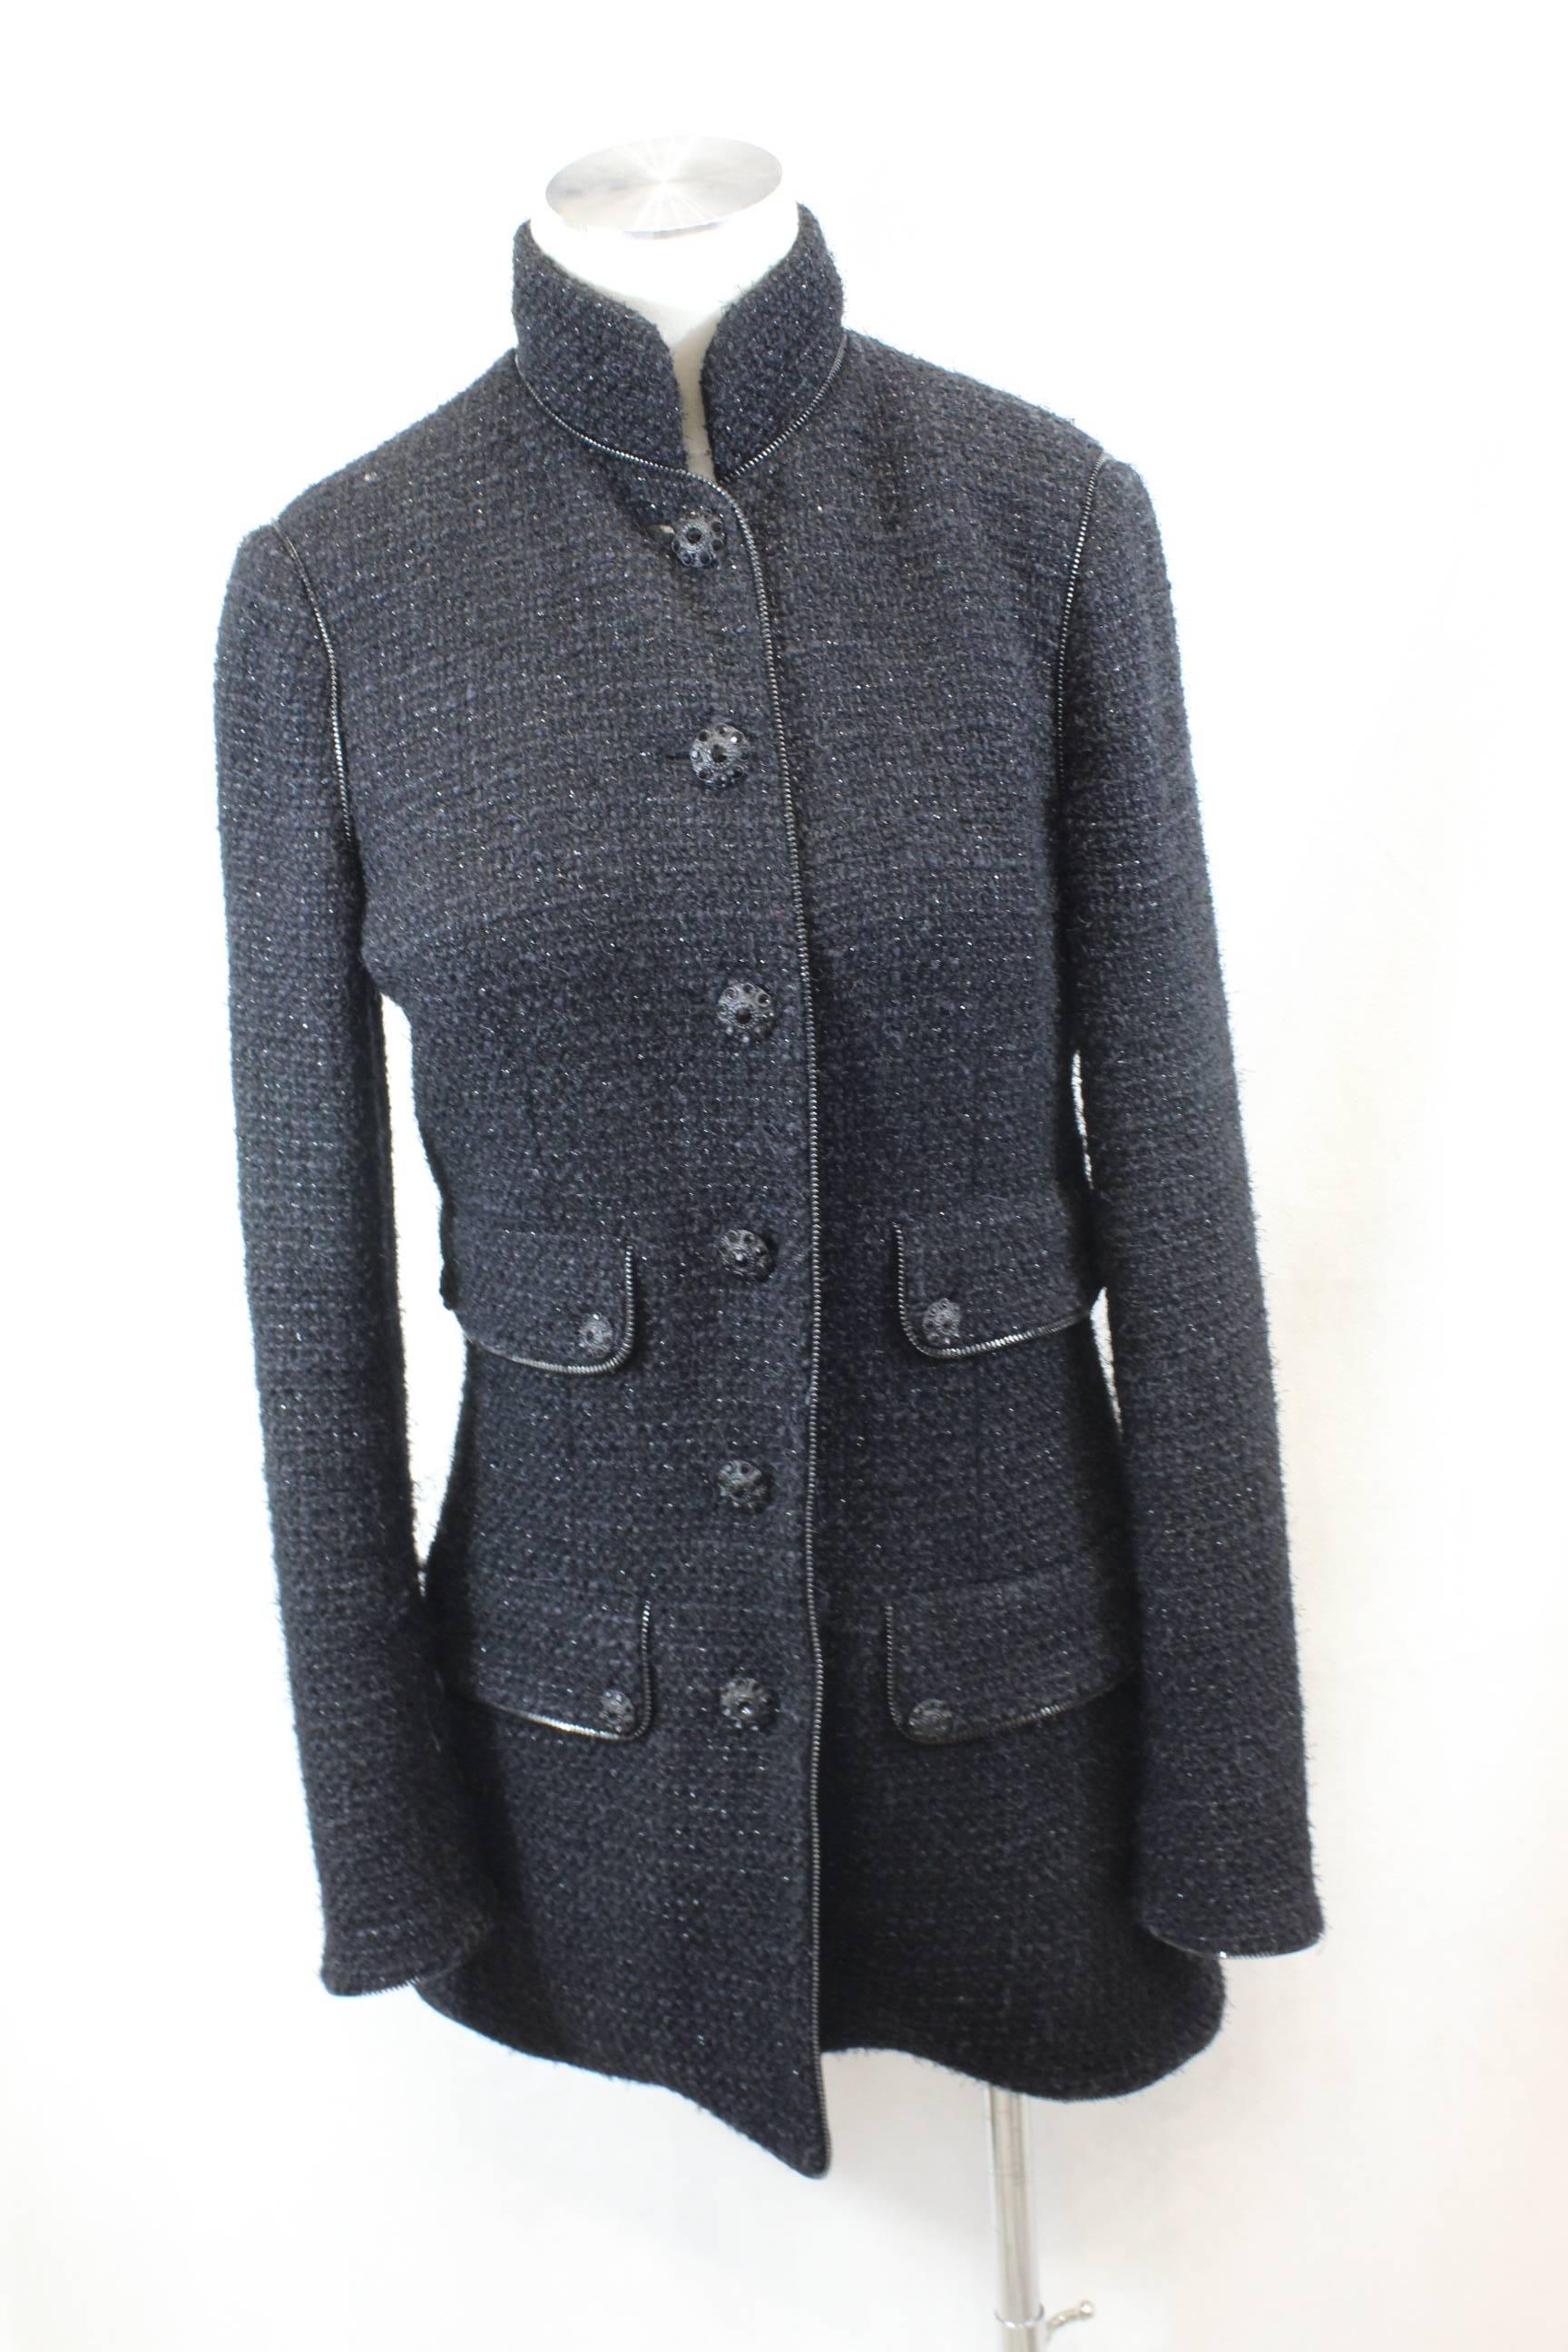 Nice Chanel tweed Jacket from 2010 Collection.

The jacket is decorated with zips aall over it.

Nice condition some small sign of use but nothing really noticeable
